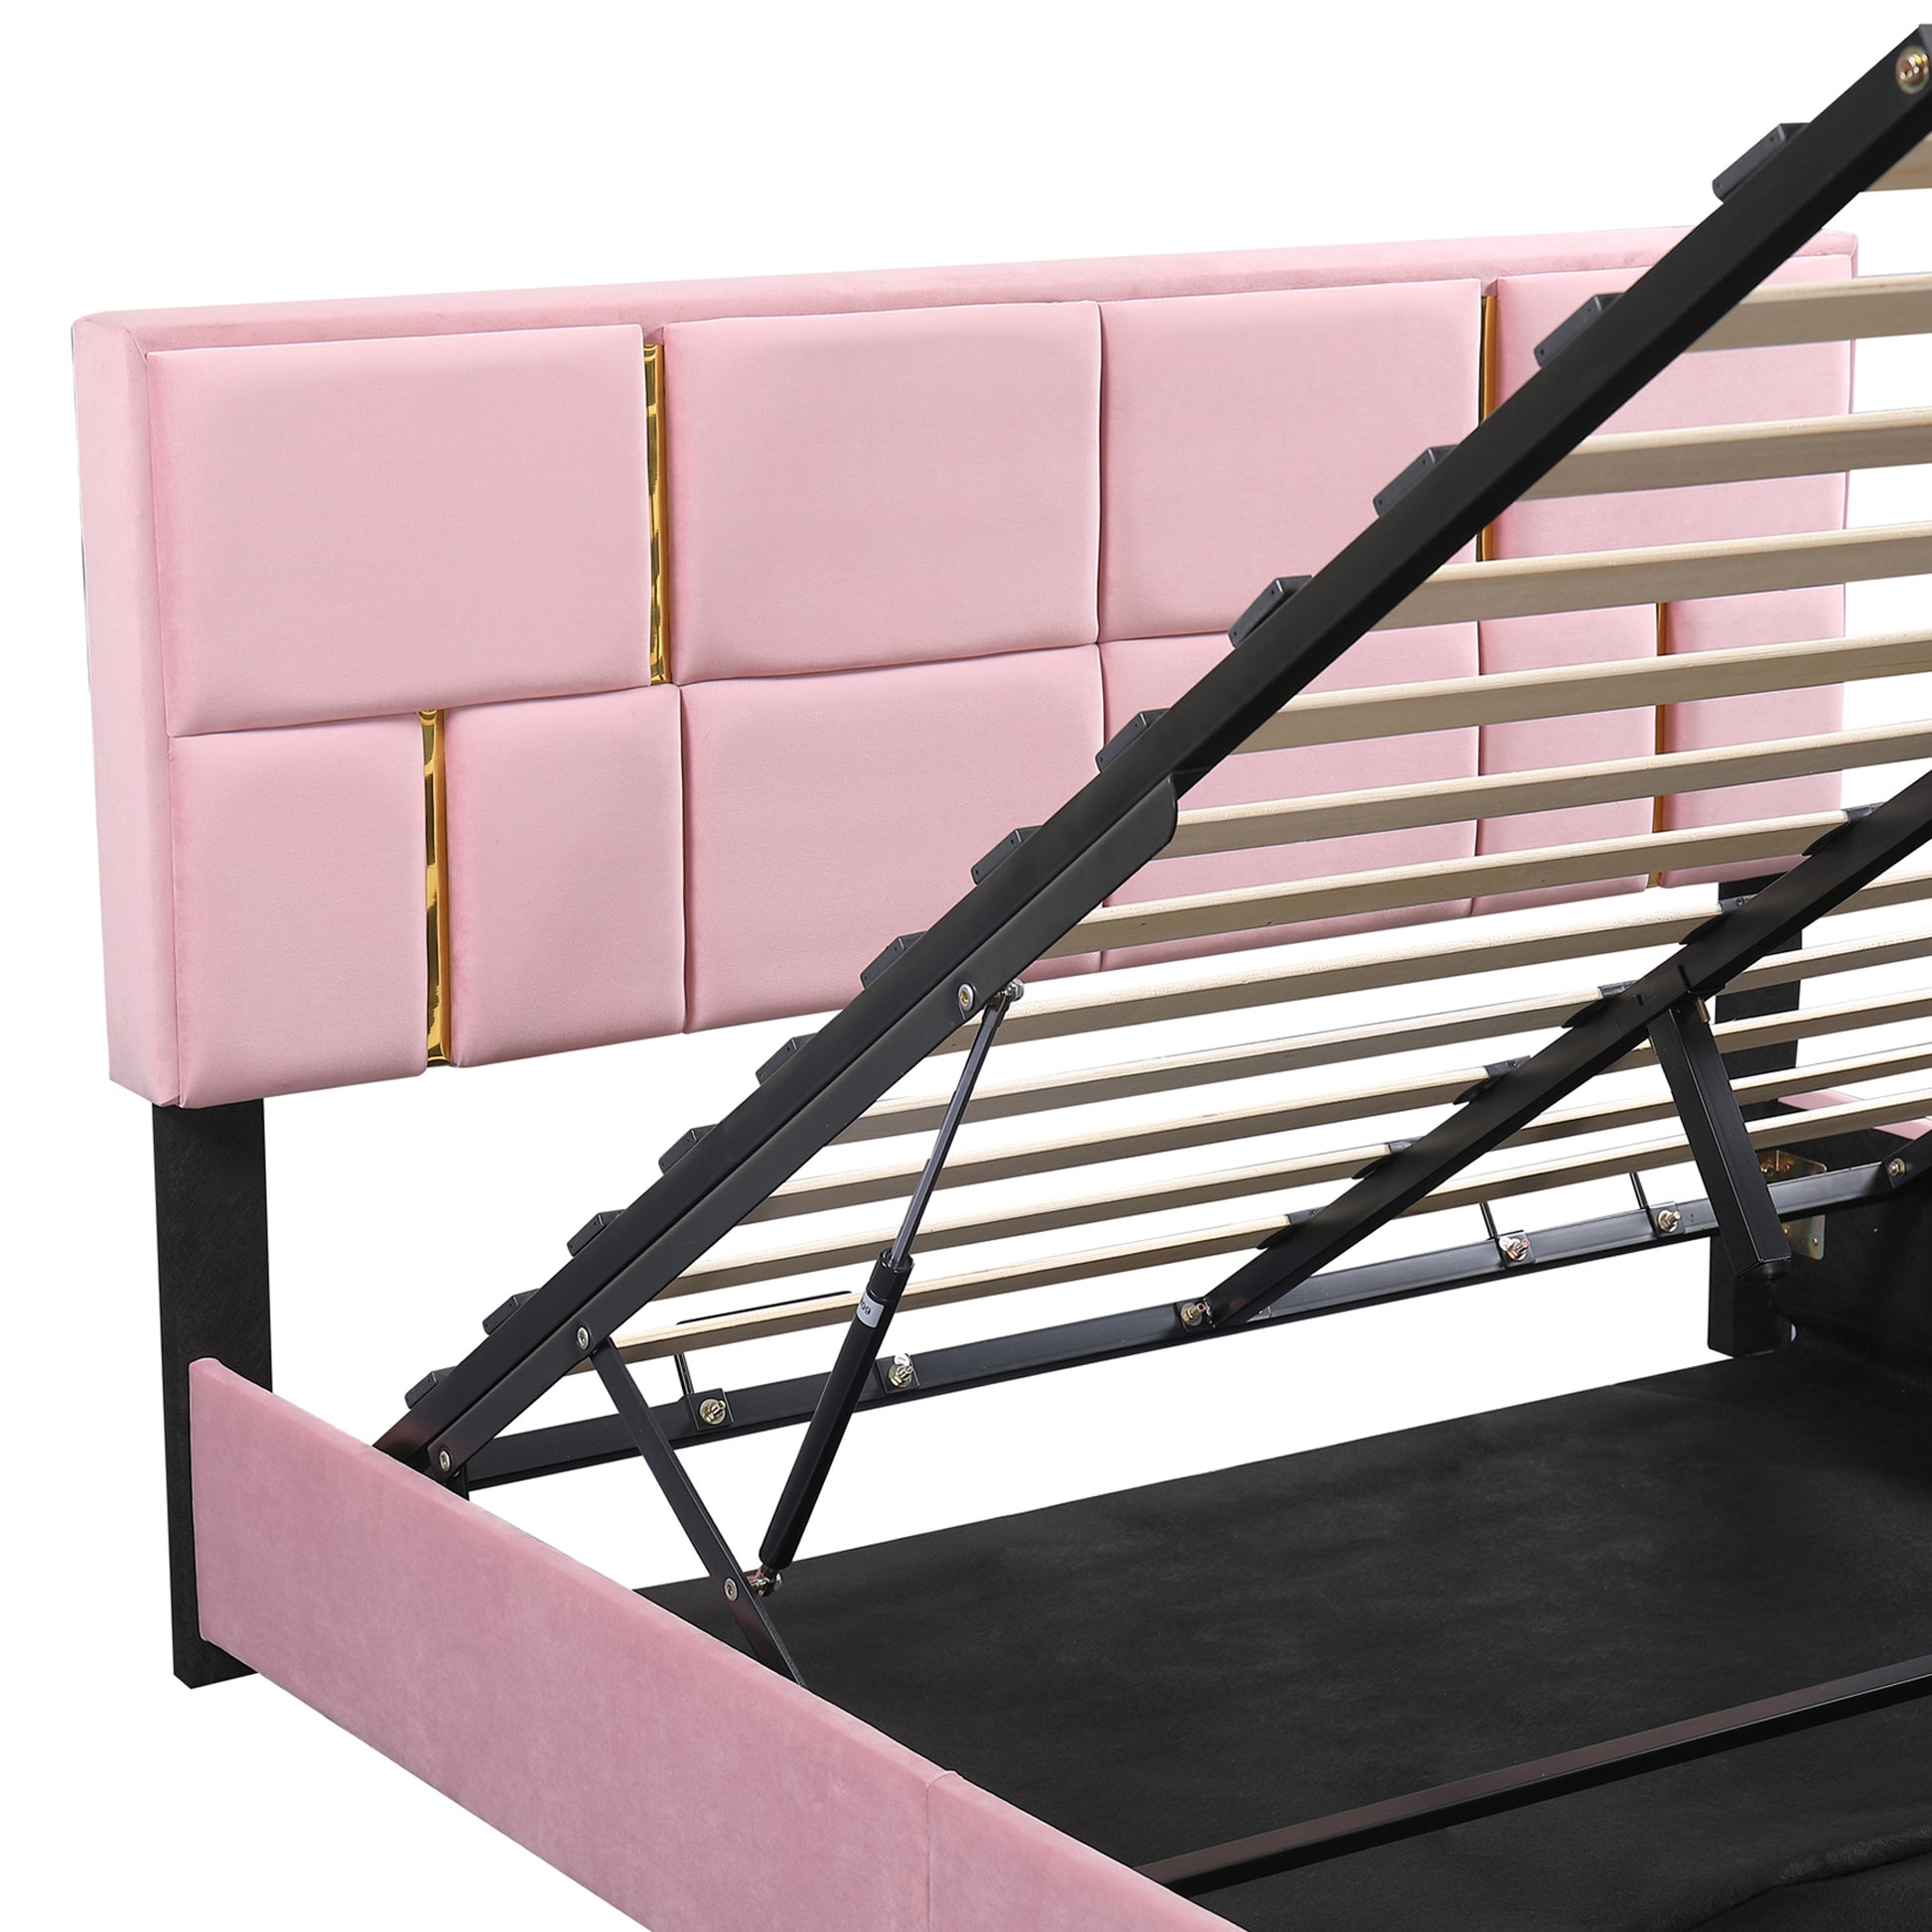 2-Pieces Bedroom Sets,Queen Size Upholstered Platform Bed with Hydraulic Storage System,Storage Ottoman with Metal Legs,Pink - Enova Luxe Home Store